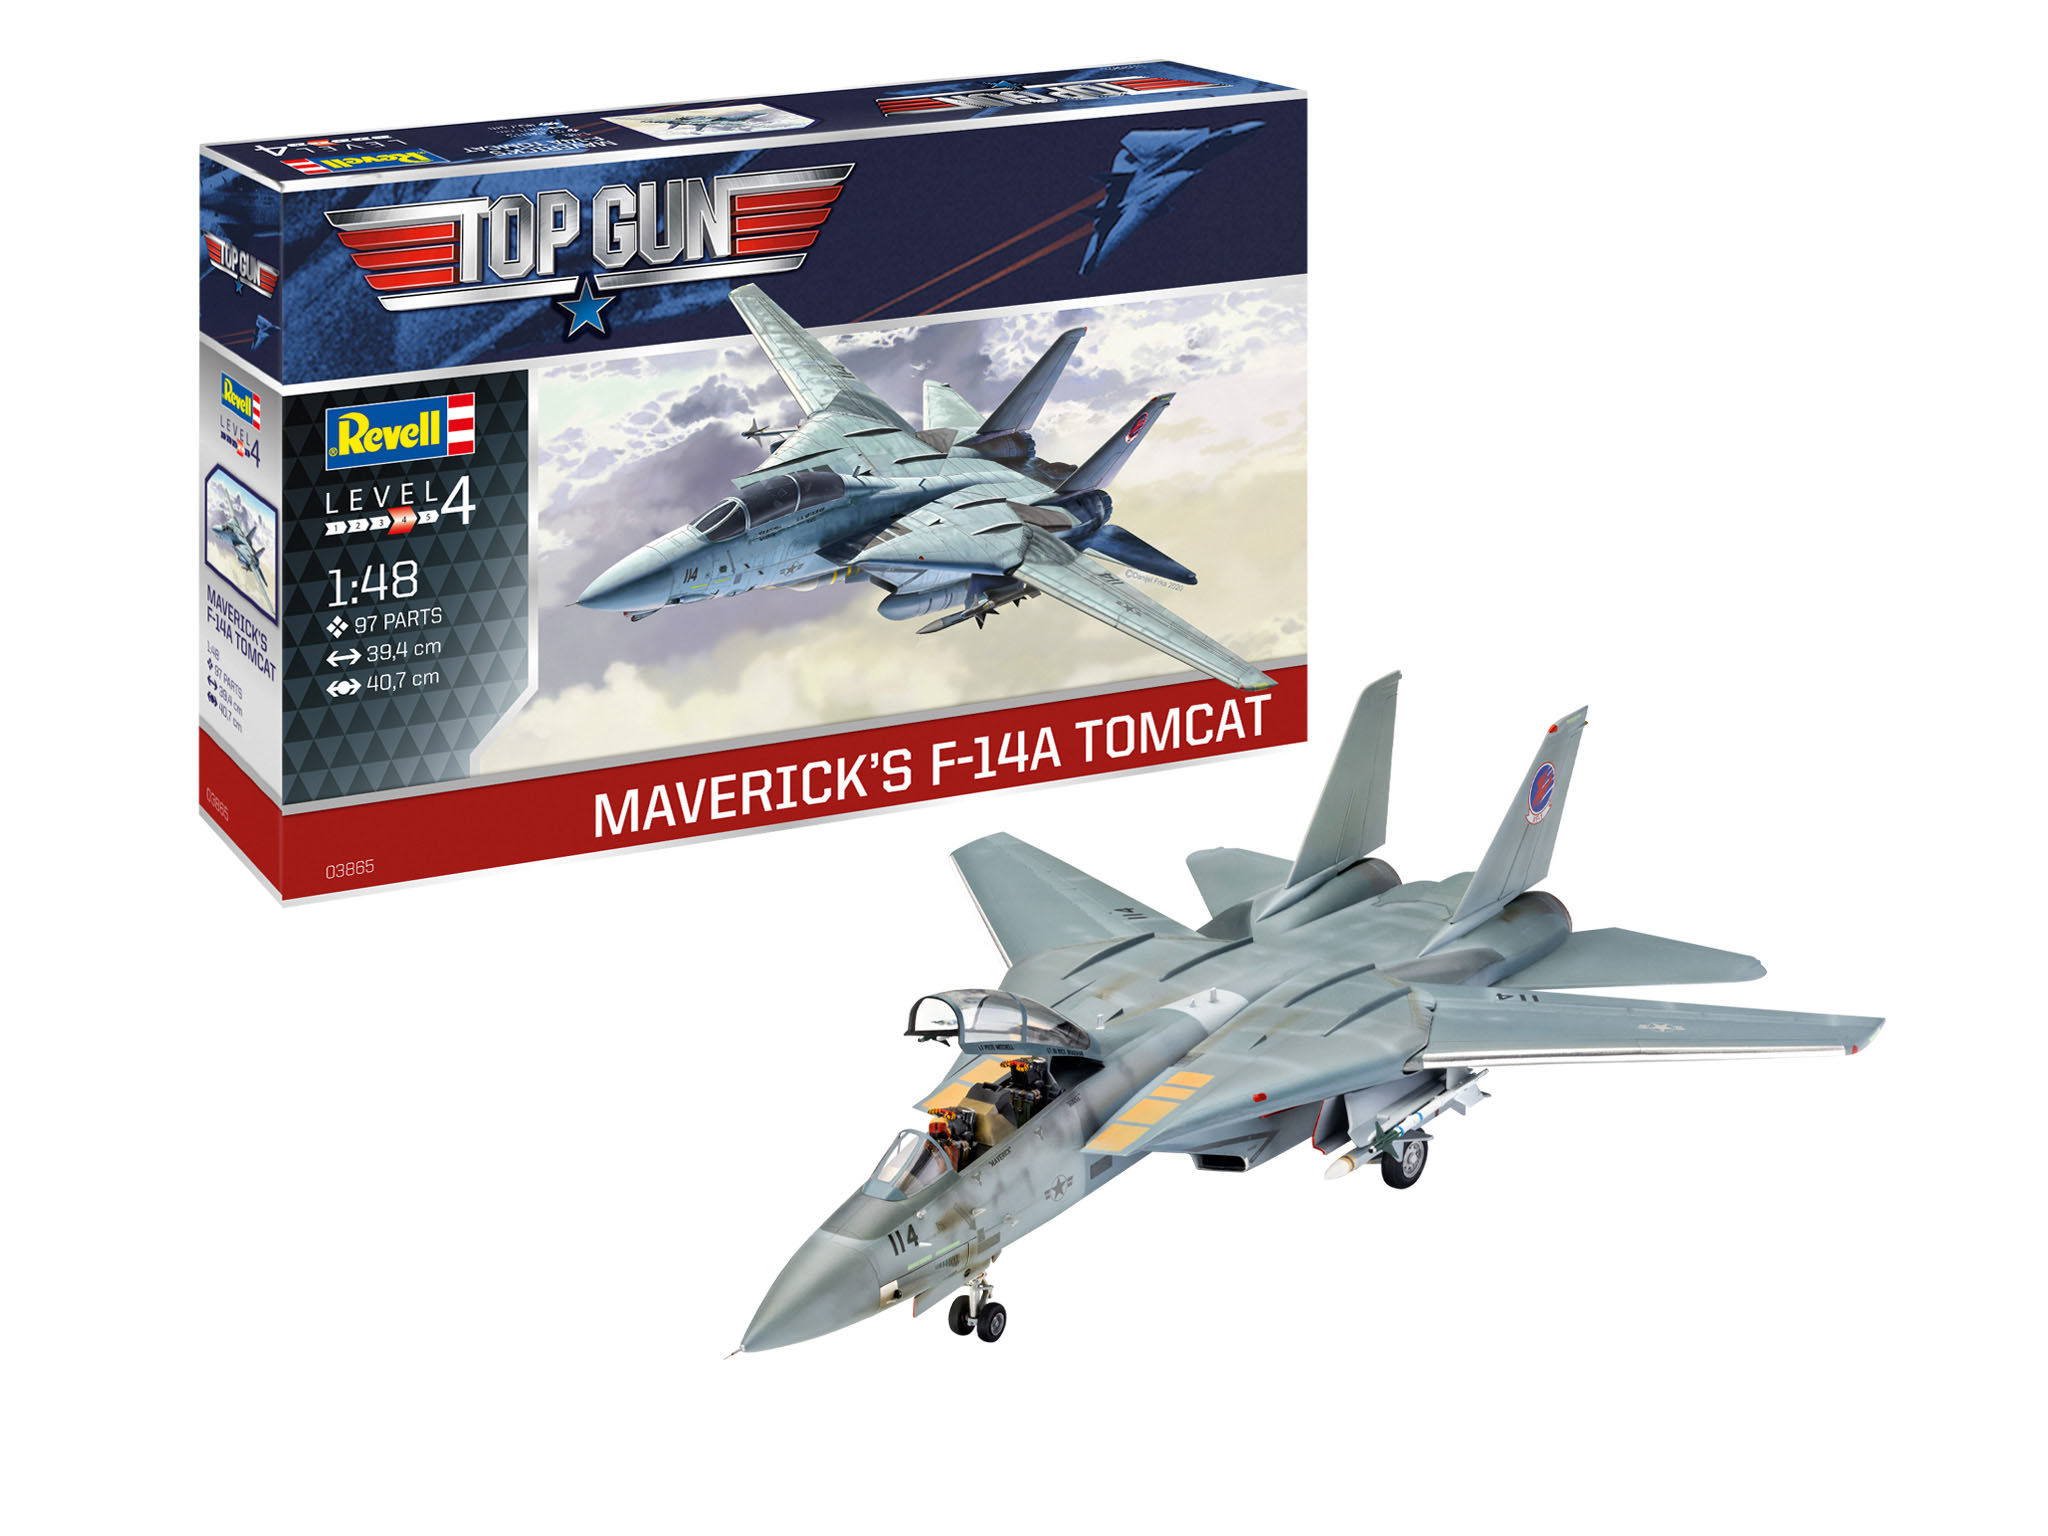 1/48　F-14A トムキャット “トップ ガン”